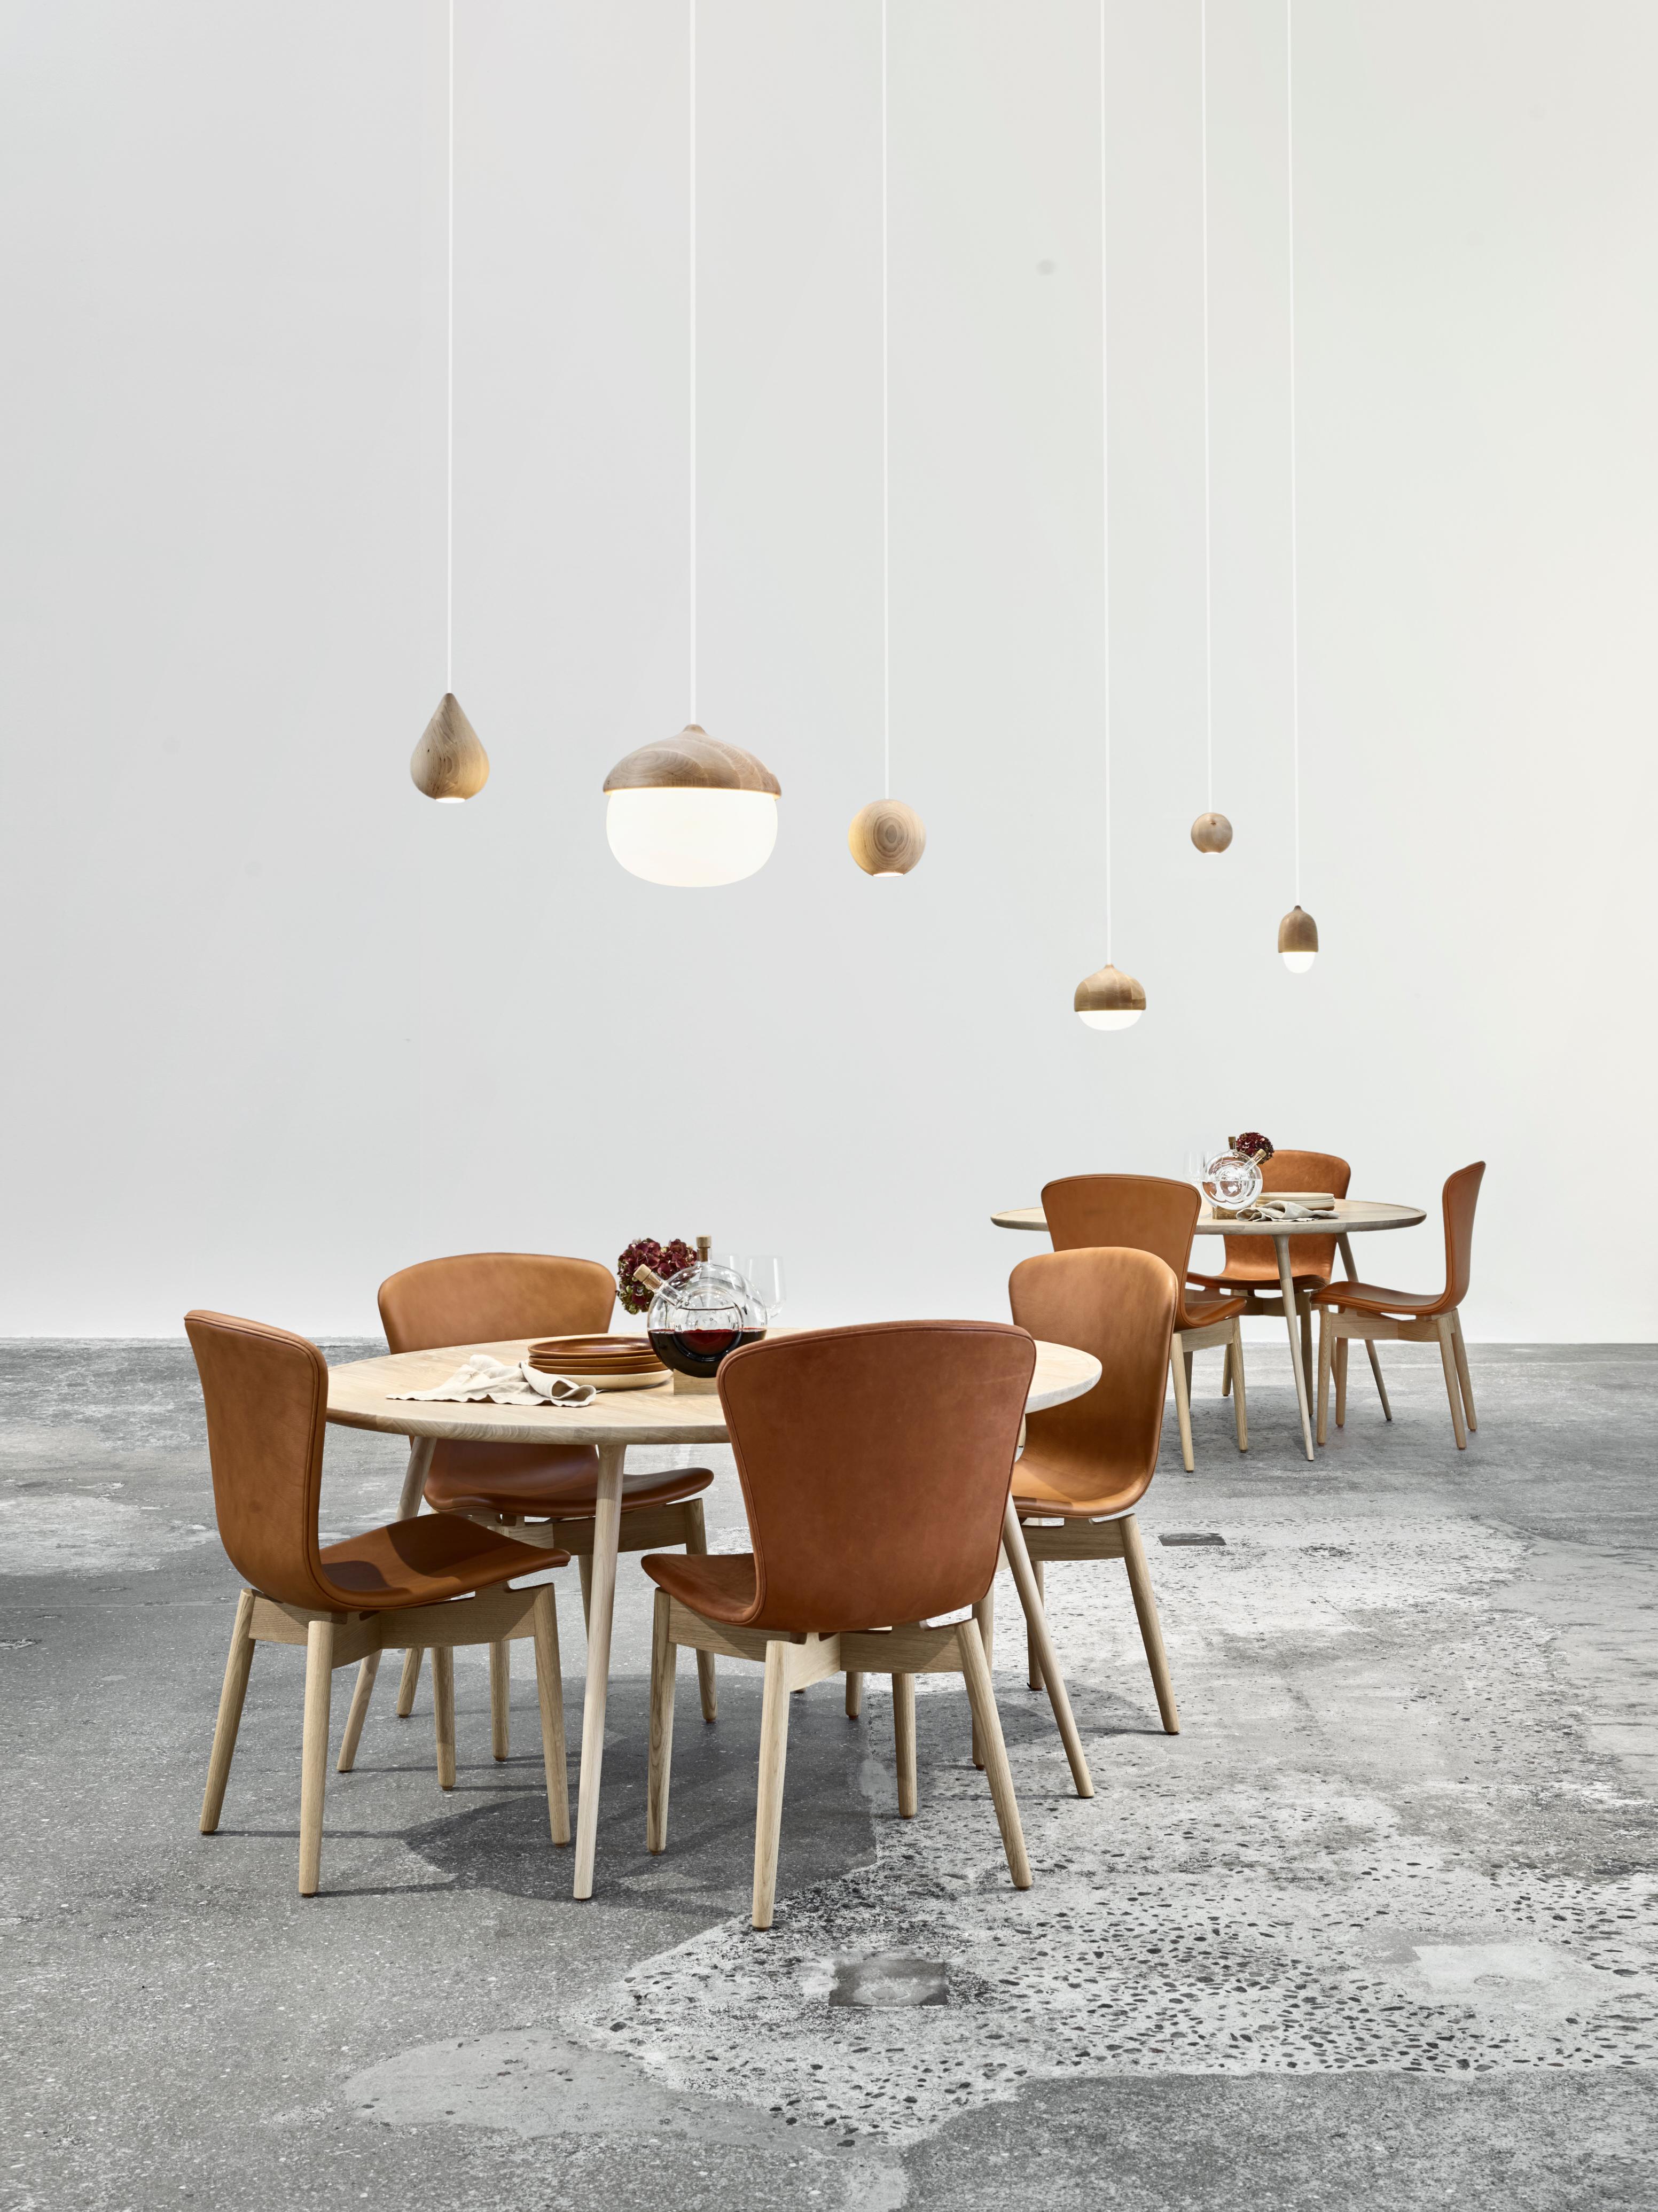 The Mater Accent dining table is designed by the Danish architect duo Space Copenhagen and combines a sculptural and handcrafted aesthetic. Following along the same bloodline as the highly successful 2009 Mater High Stool, the Accent collection